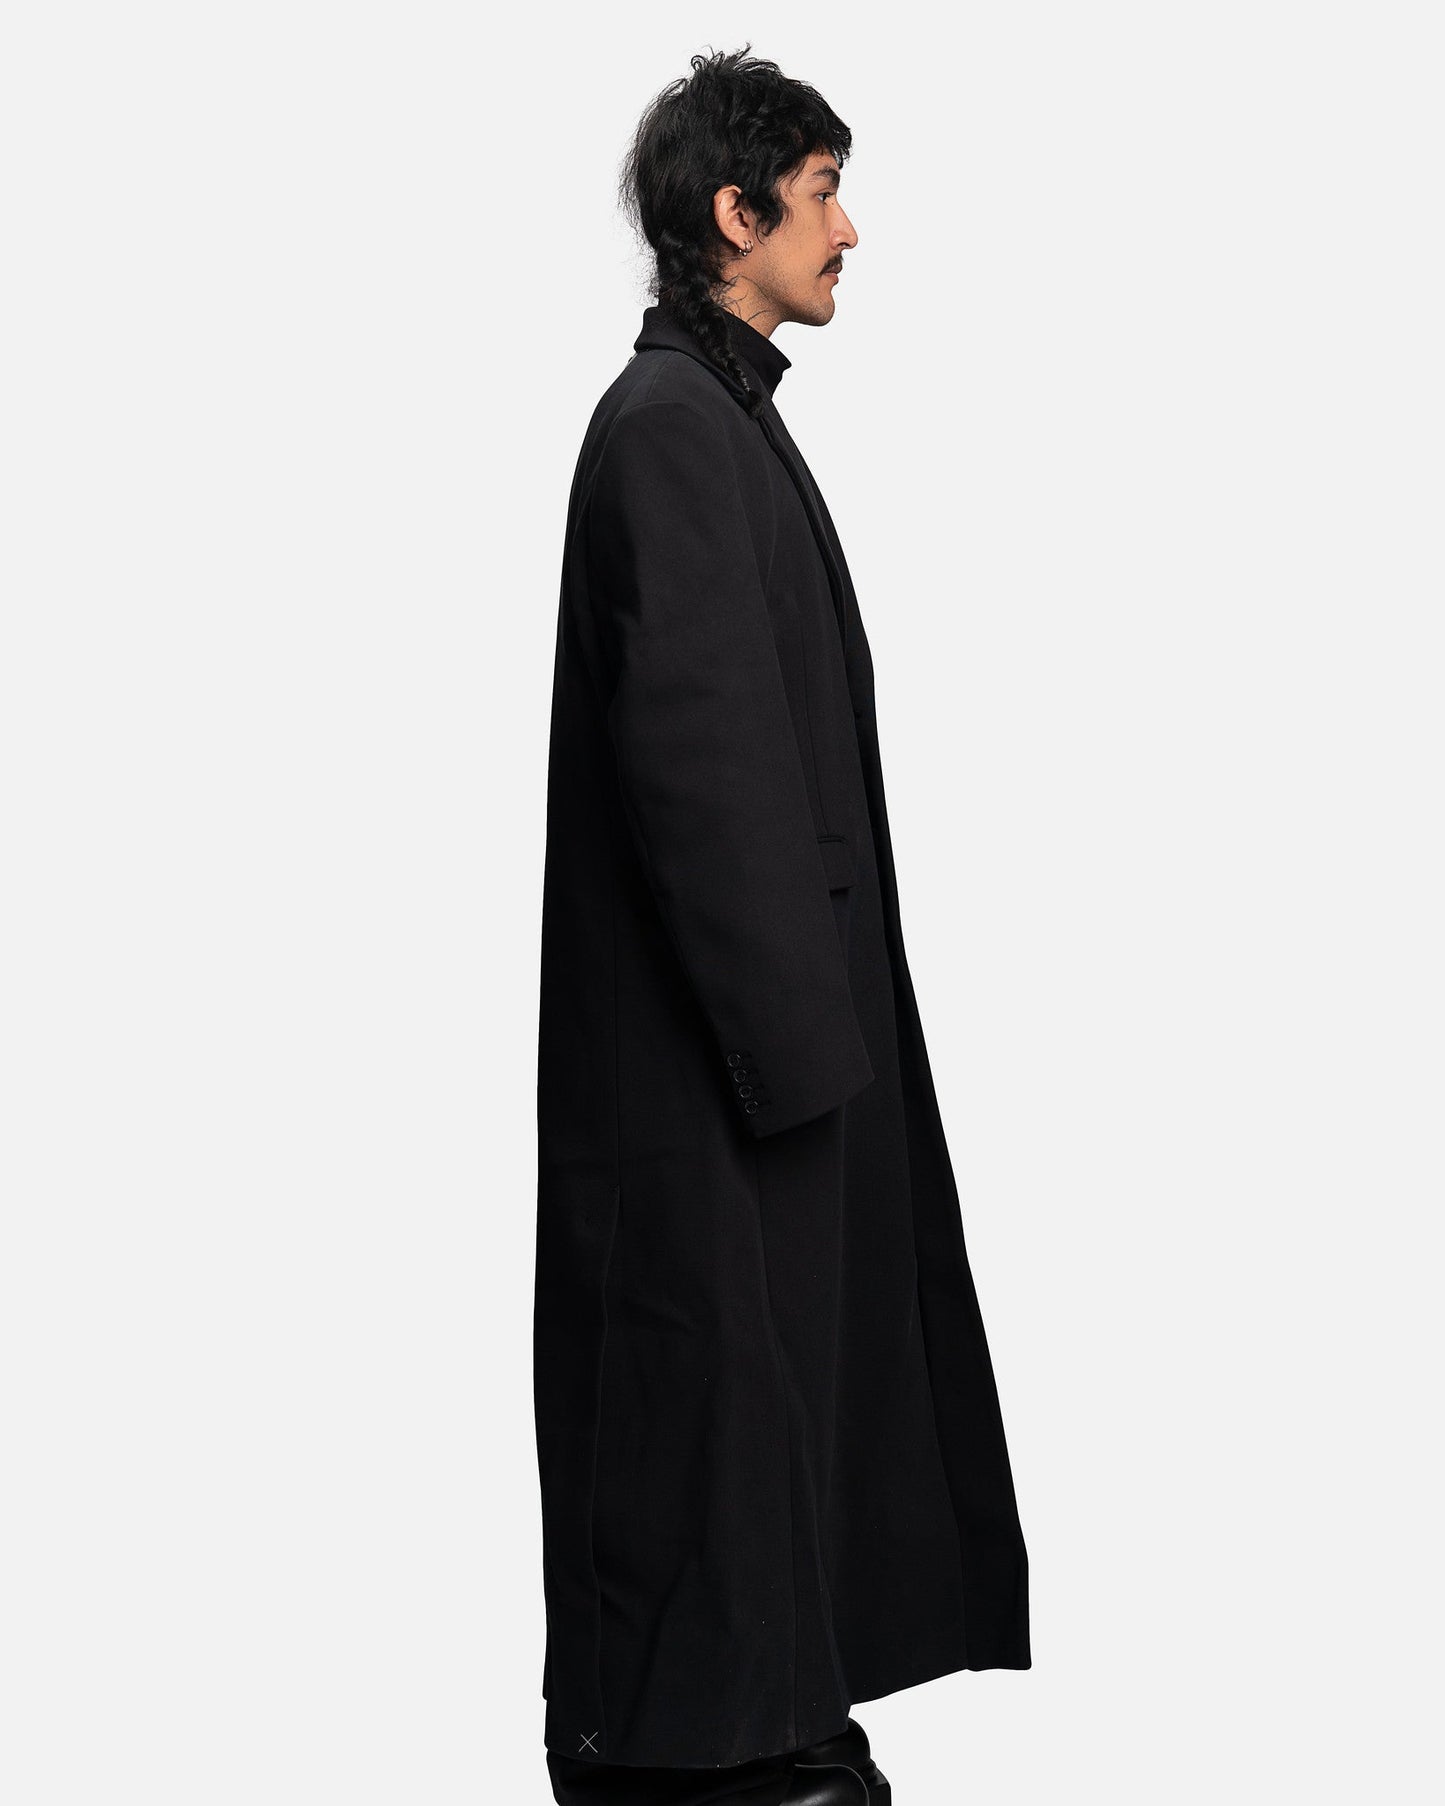 VETEMENTS UNISEX BOXY SINGLE BREASTED MOLTON TAILORED COAT - NOBLEMARS